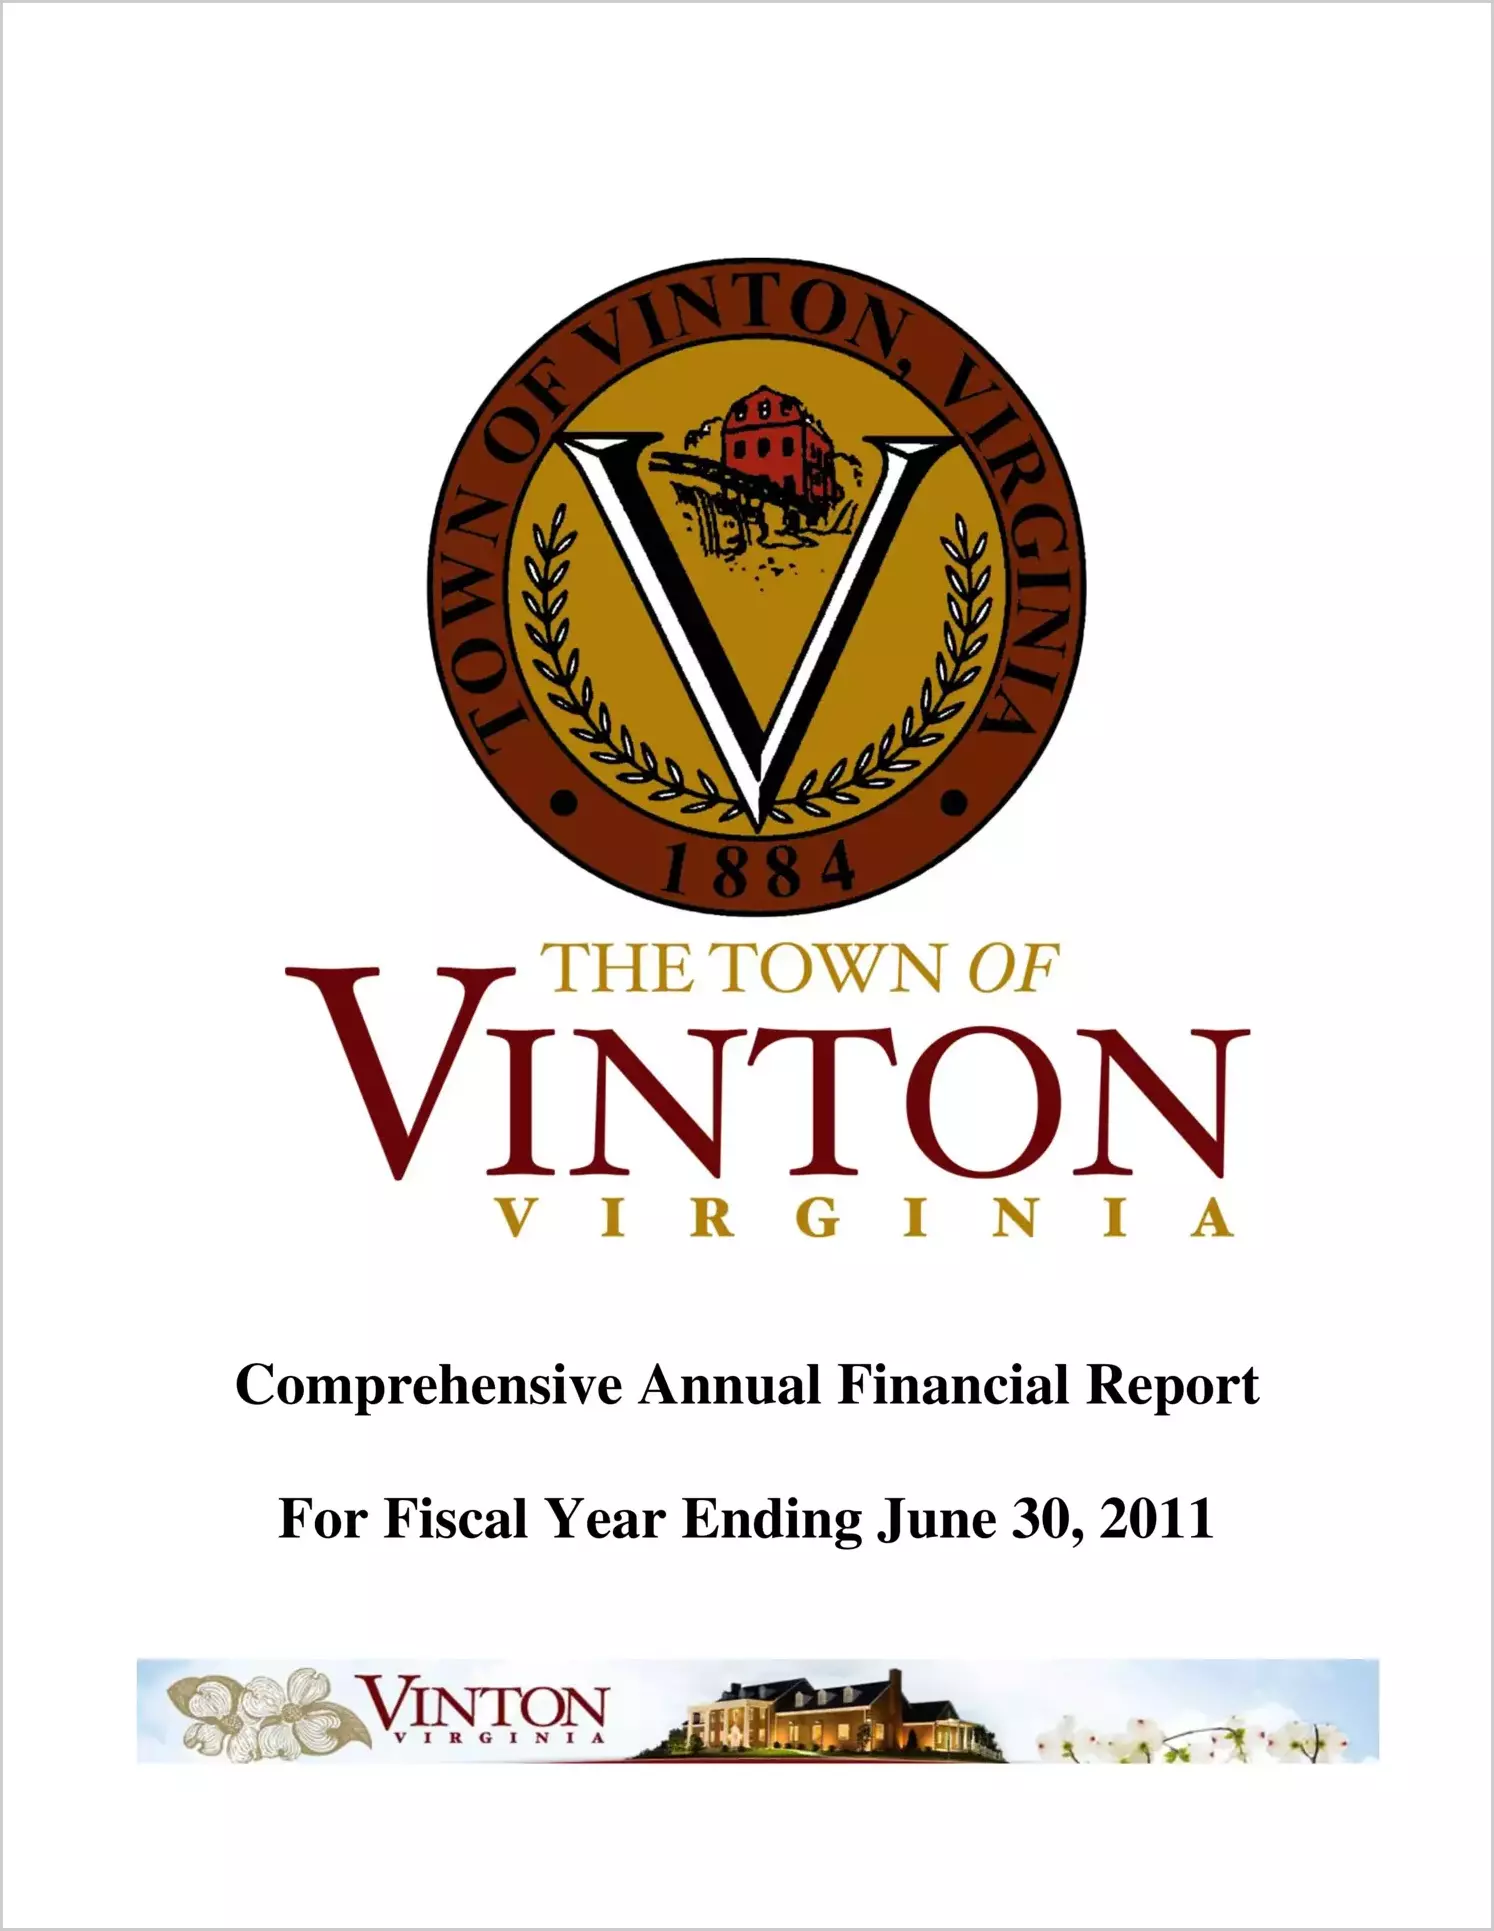 2011 Annual Financial Report for Town of Vinton